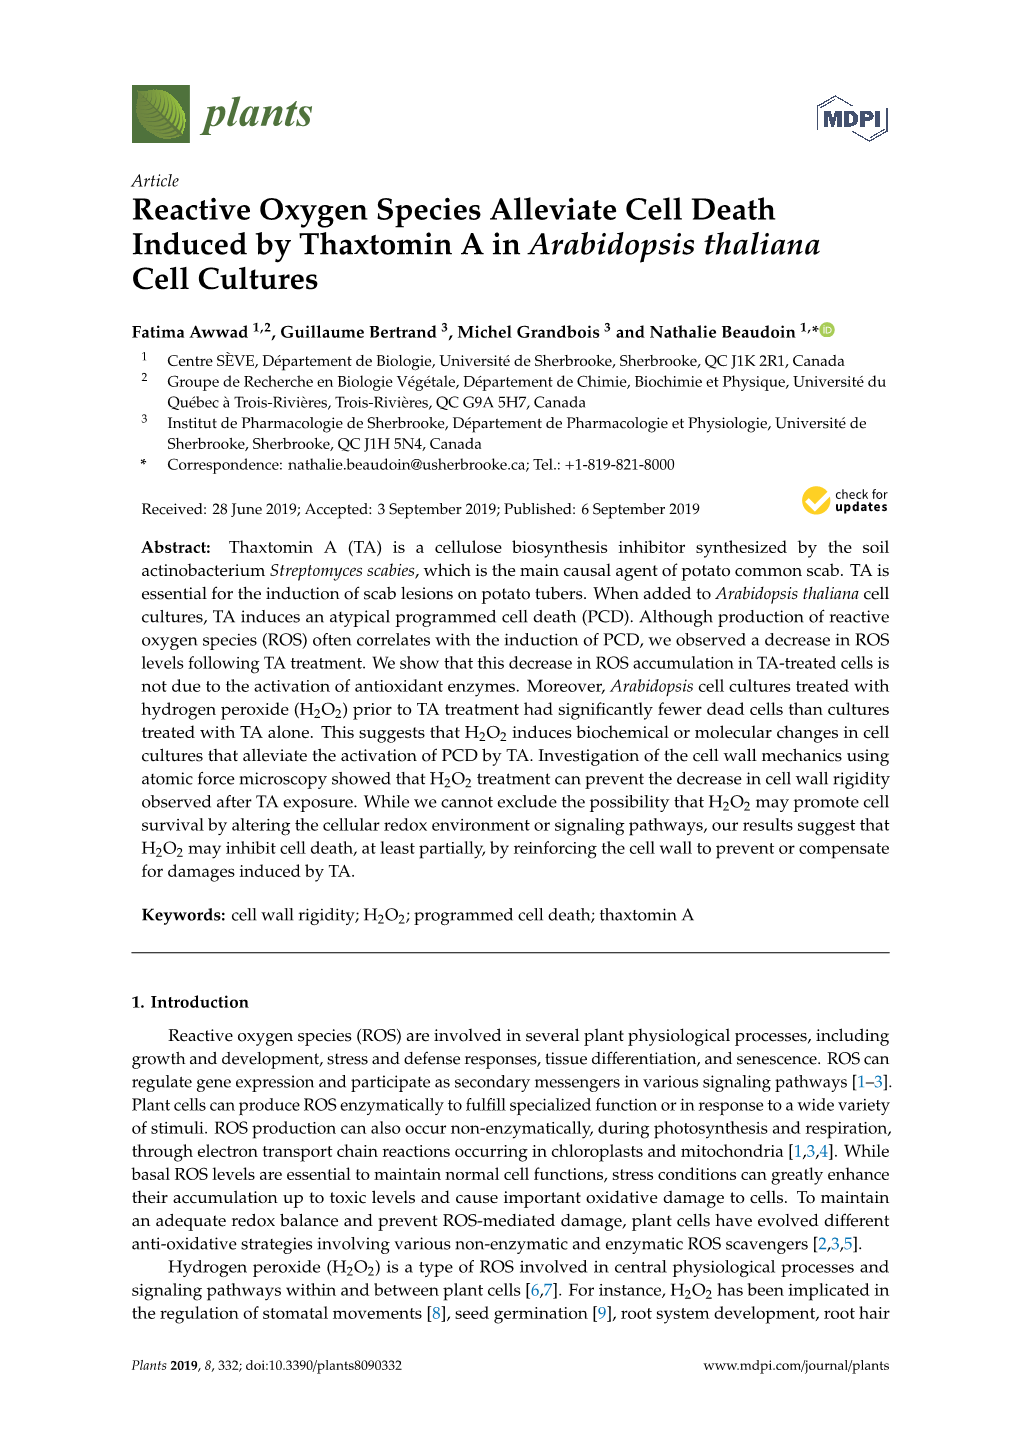 Reactive Oxygen Species Alleviate Cell Death Induced by Thaxtomin a in Arabidopsis Thaliana Cell Cultures